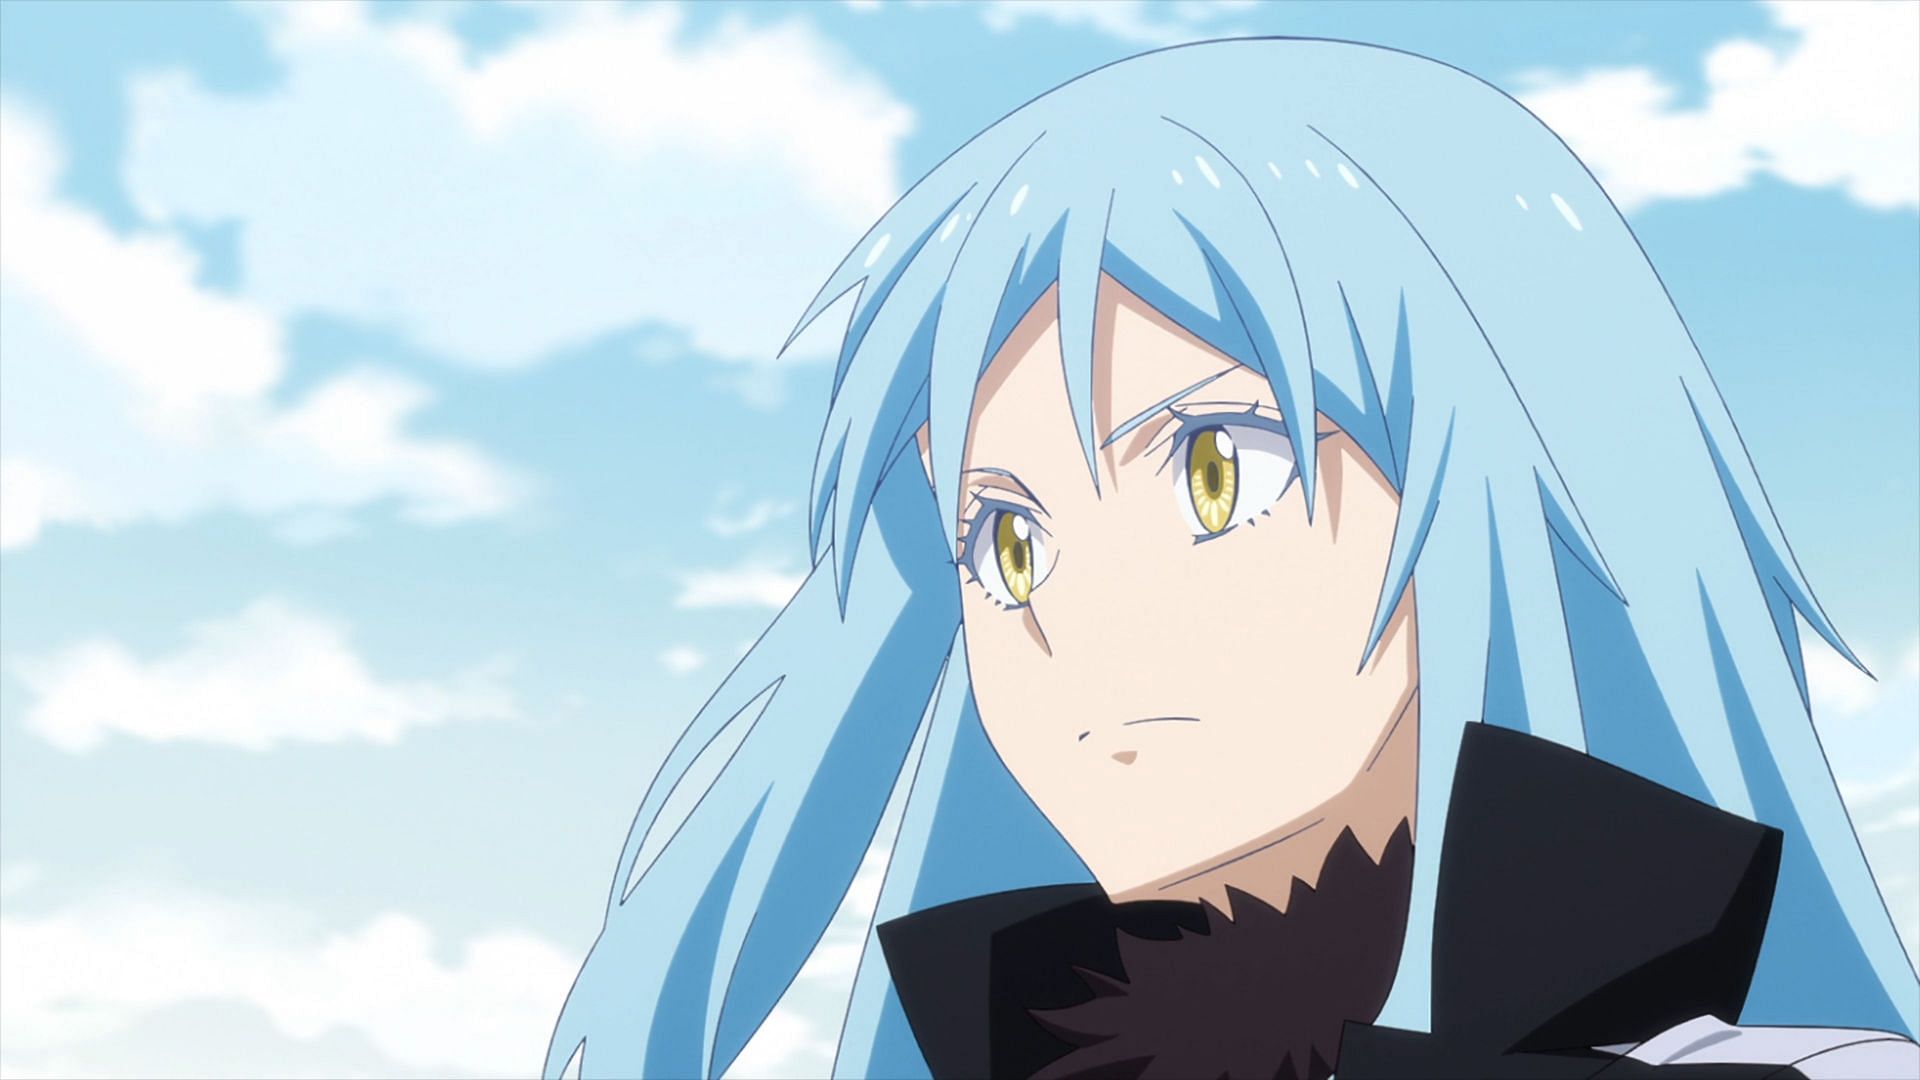 That Time I Got Reincarnated as a Slime episode 56 release date and time (Image via 8Bit)